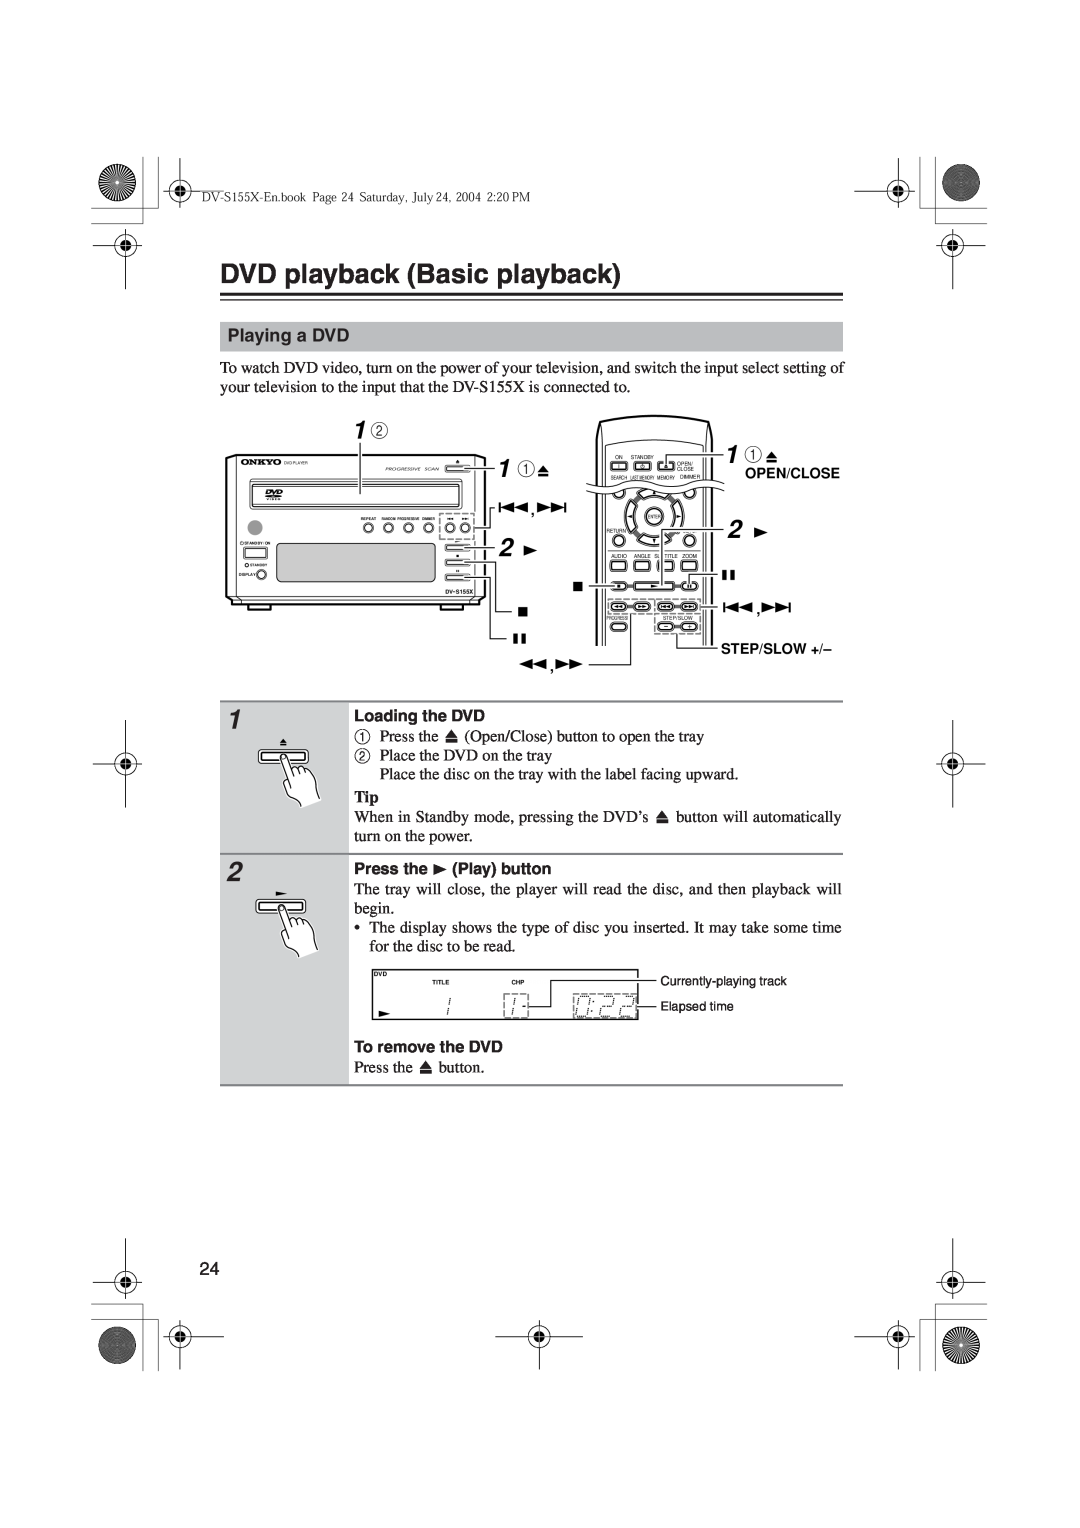 Onkyo HTC-V10X DVD playback Basic playback, Playing a DVD, Loading the DVD, Press the Play button, To remove the DVD 